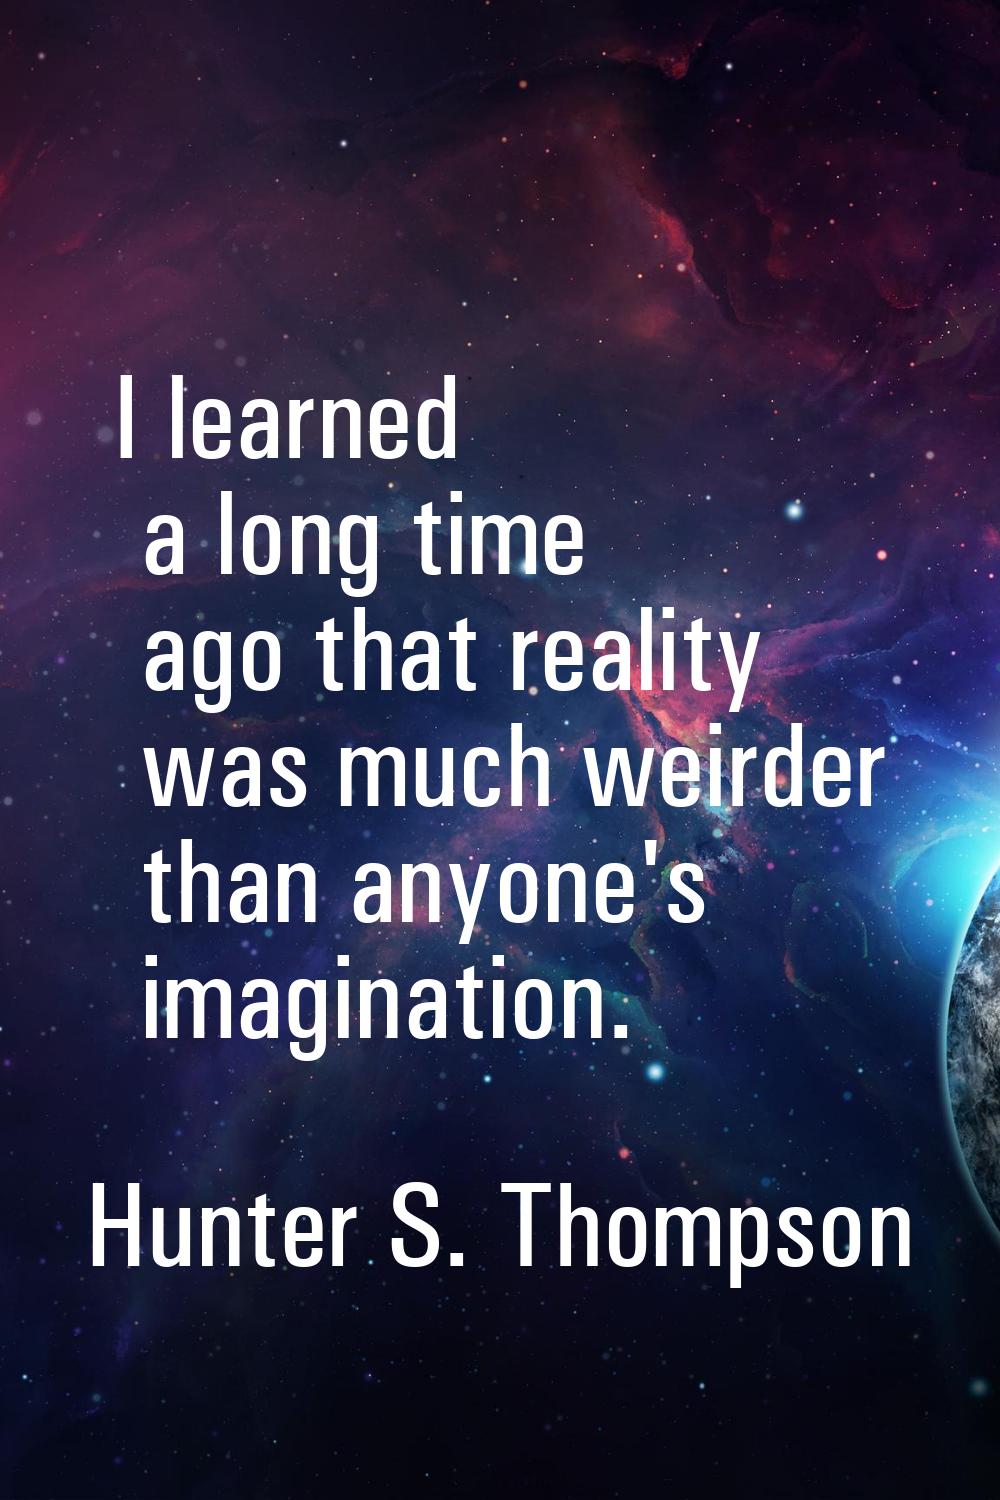 I learned a long time ago that reality was much weirder than anyone's imagination.